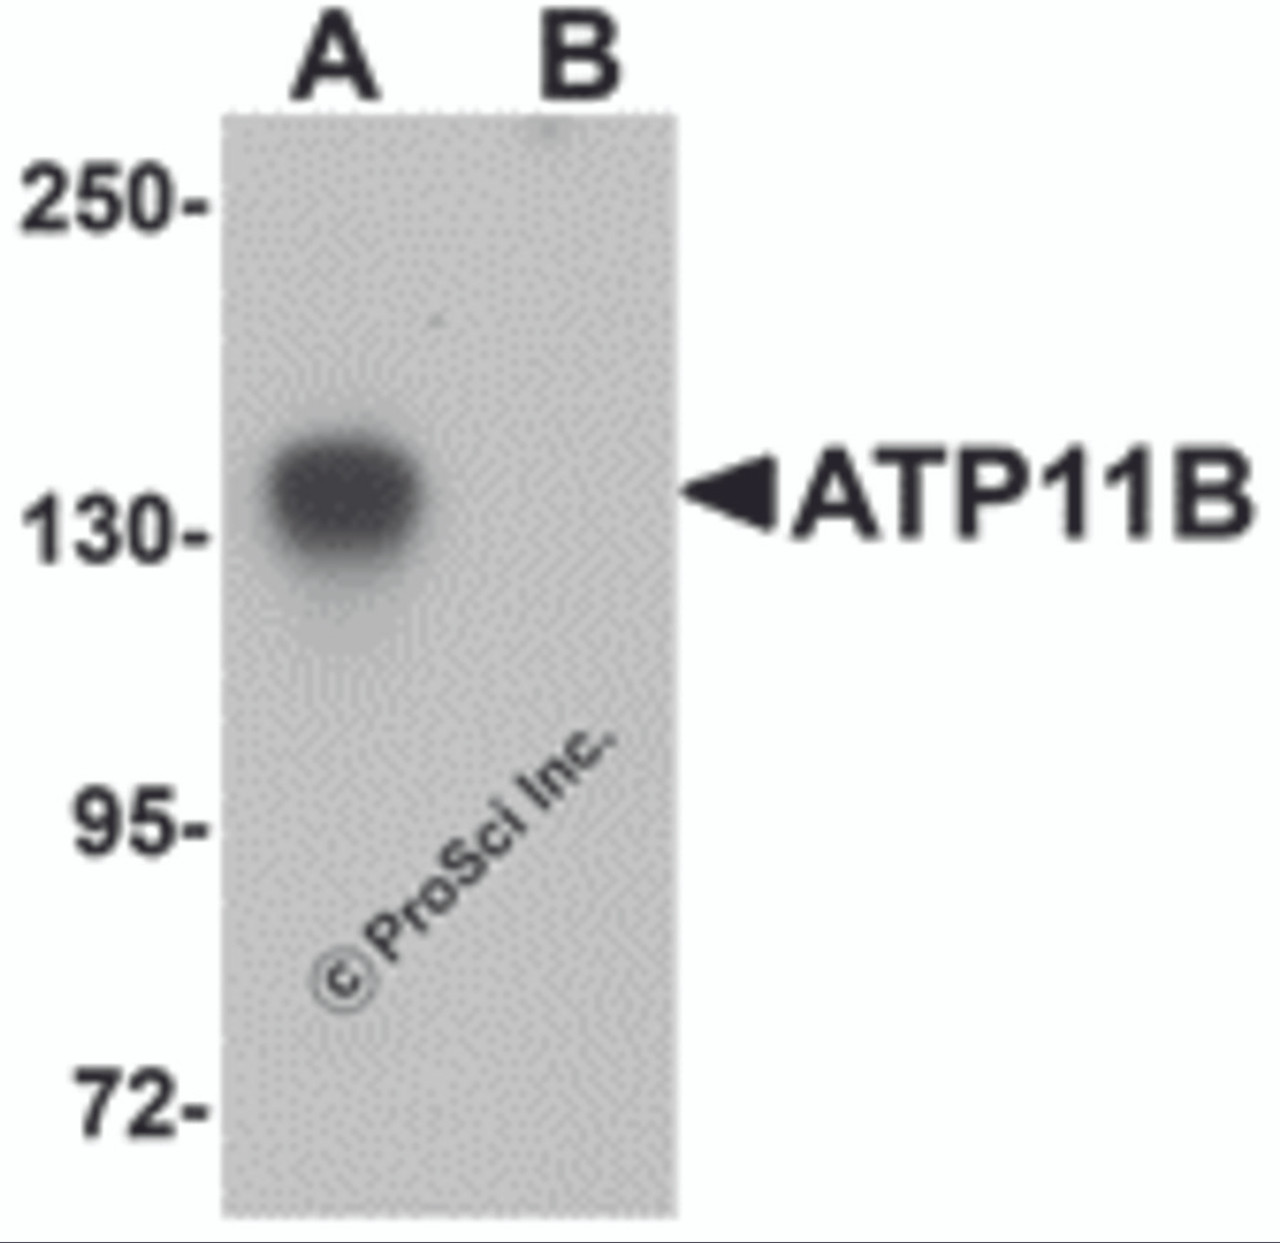 Western blot analysis of ATP11B in K562 cell tissue lysate with ATP11B antibody at 1 &#956;g/mL in (A) the absence and (B) the presence of blocking peptide.